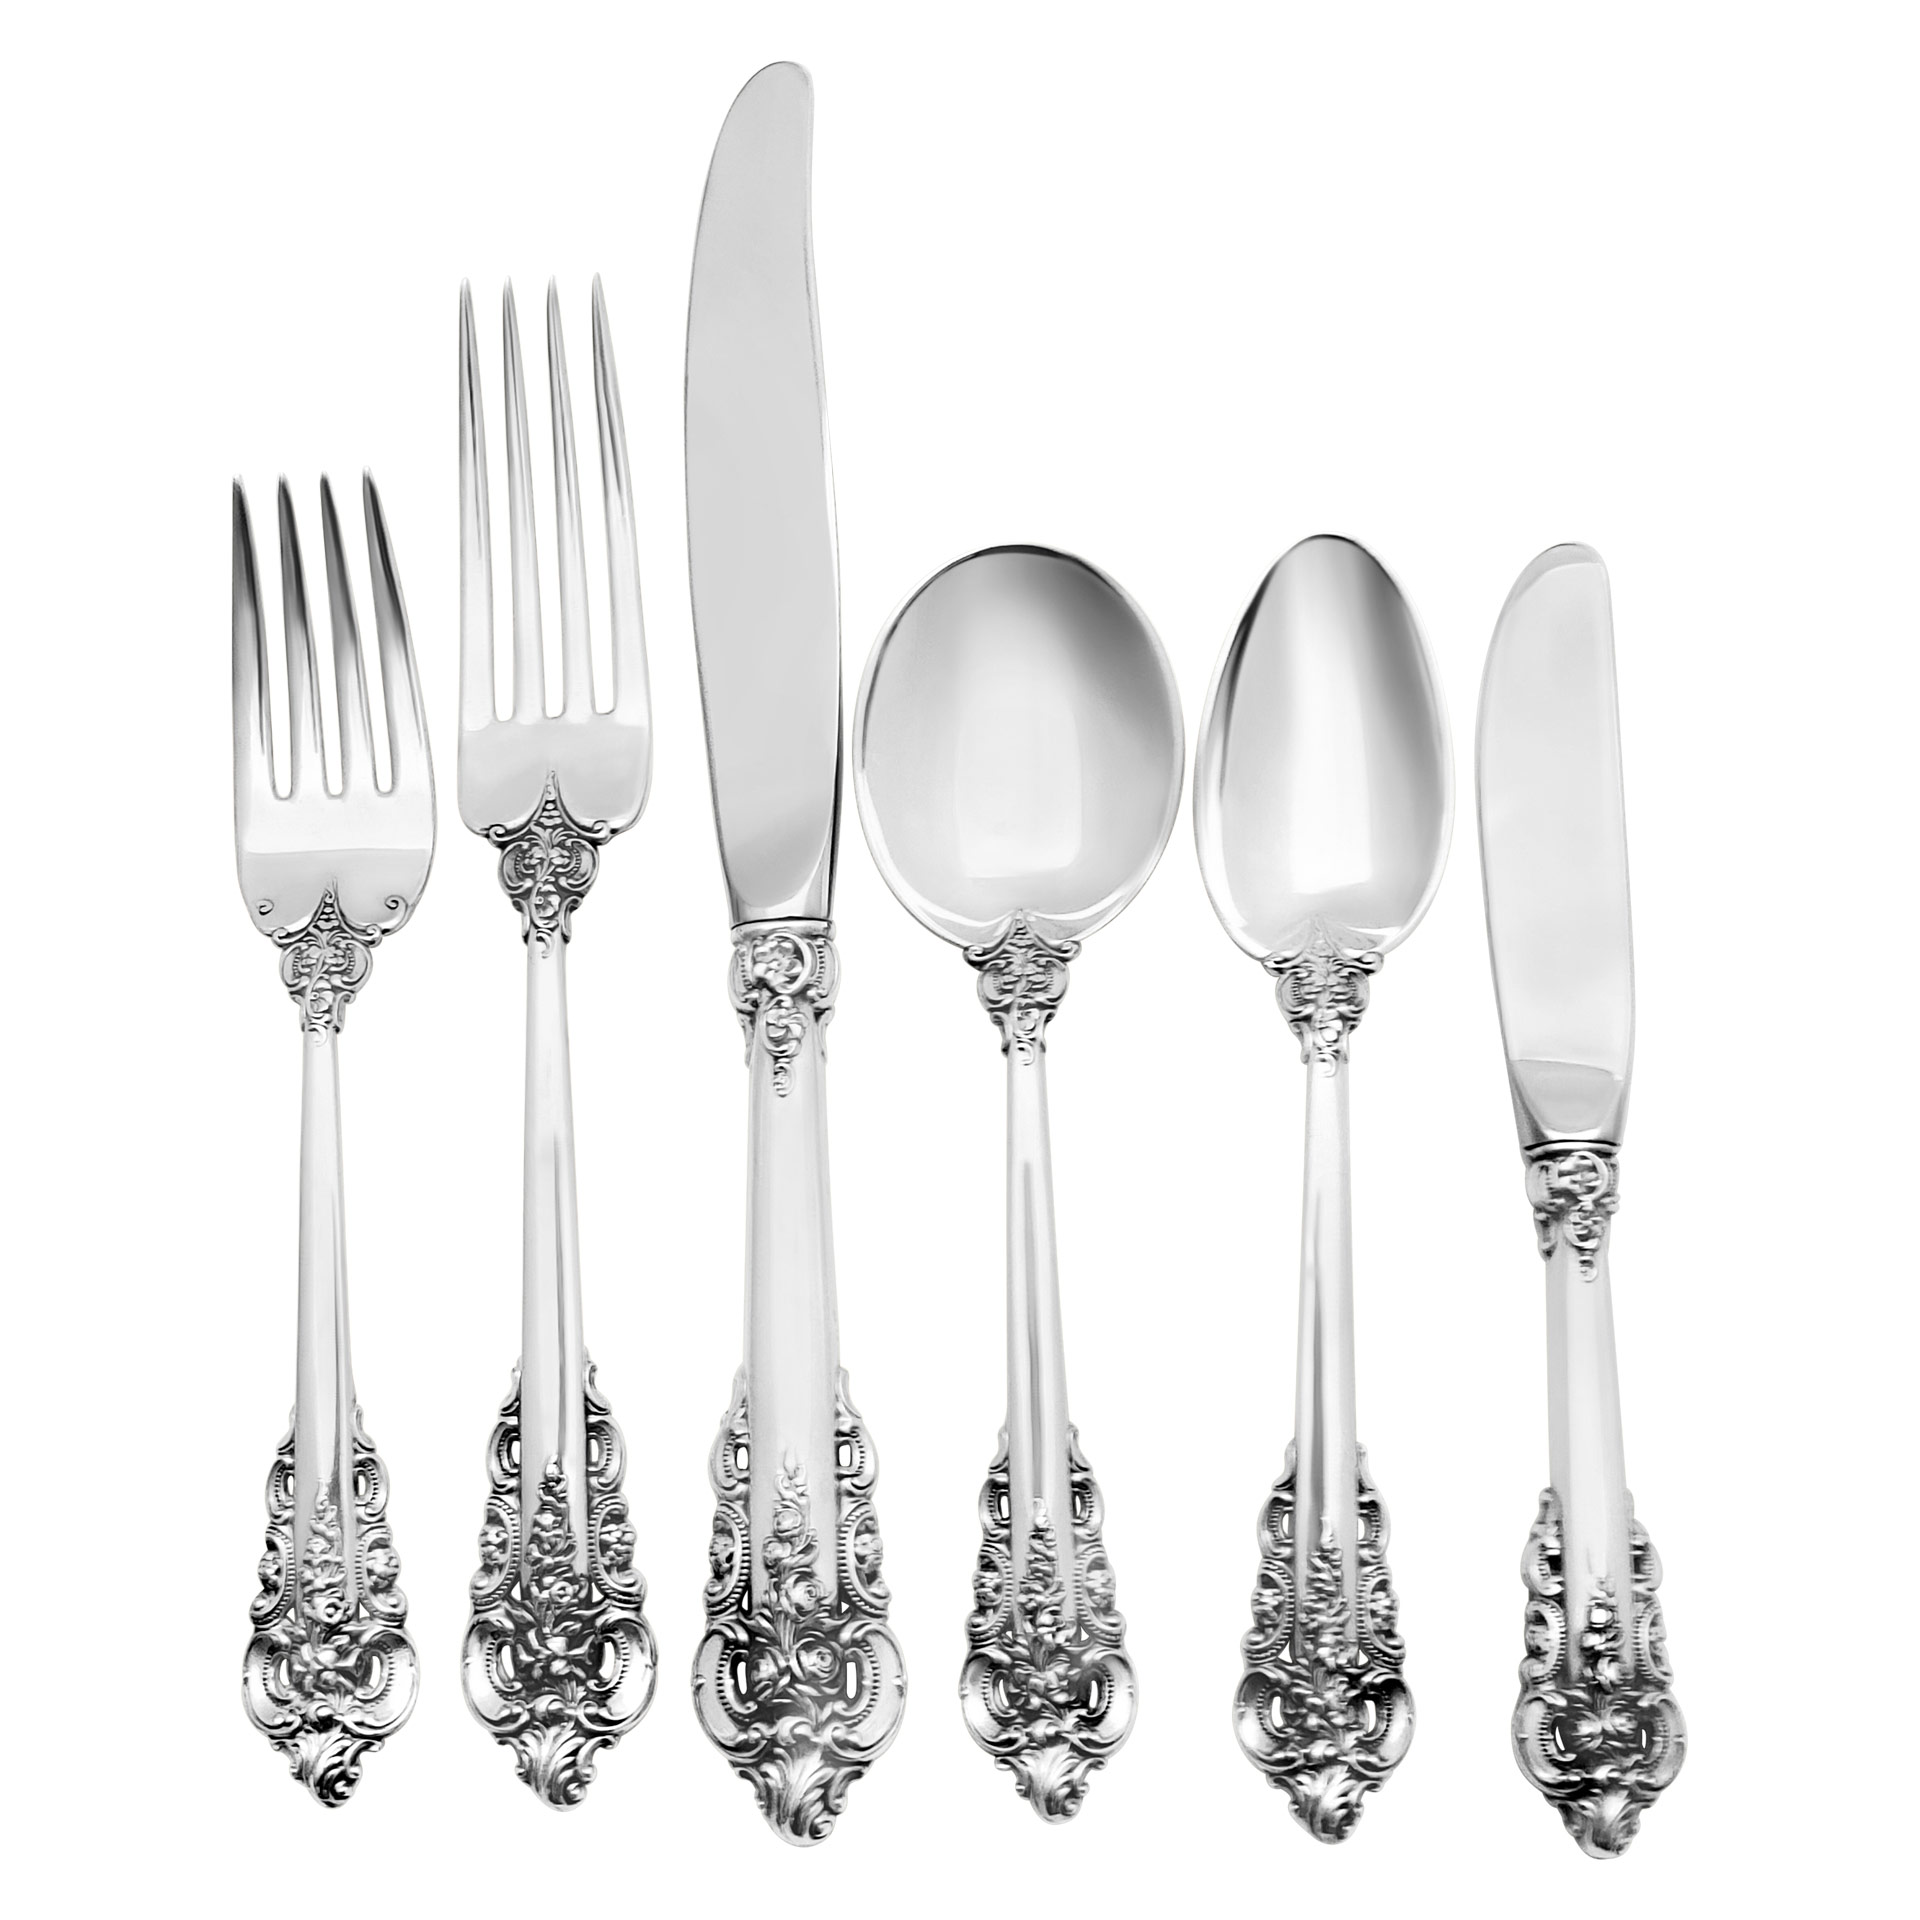 "GRANDE BAROQUE" Sterling Silver Flatware- Patented in 1941 by Wallace. 6 place setting for 10 with 10 serving pieces-- 75 pieces total